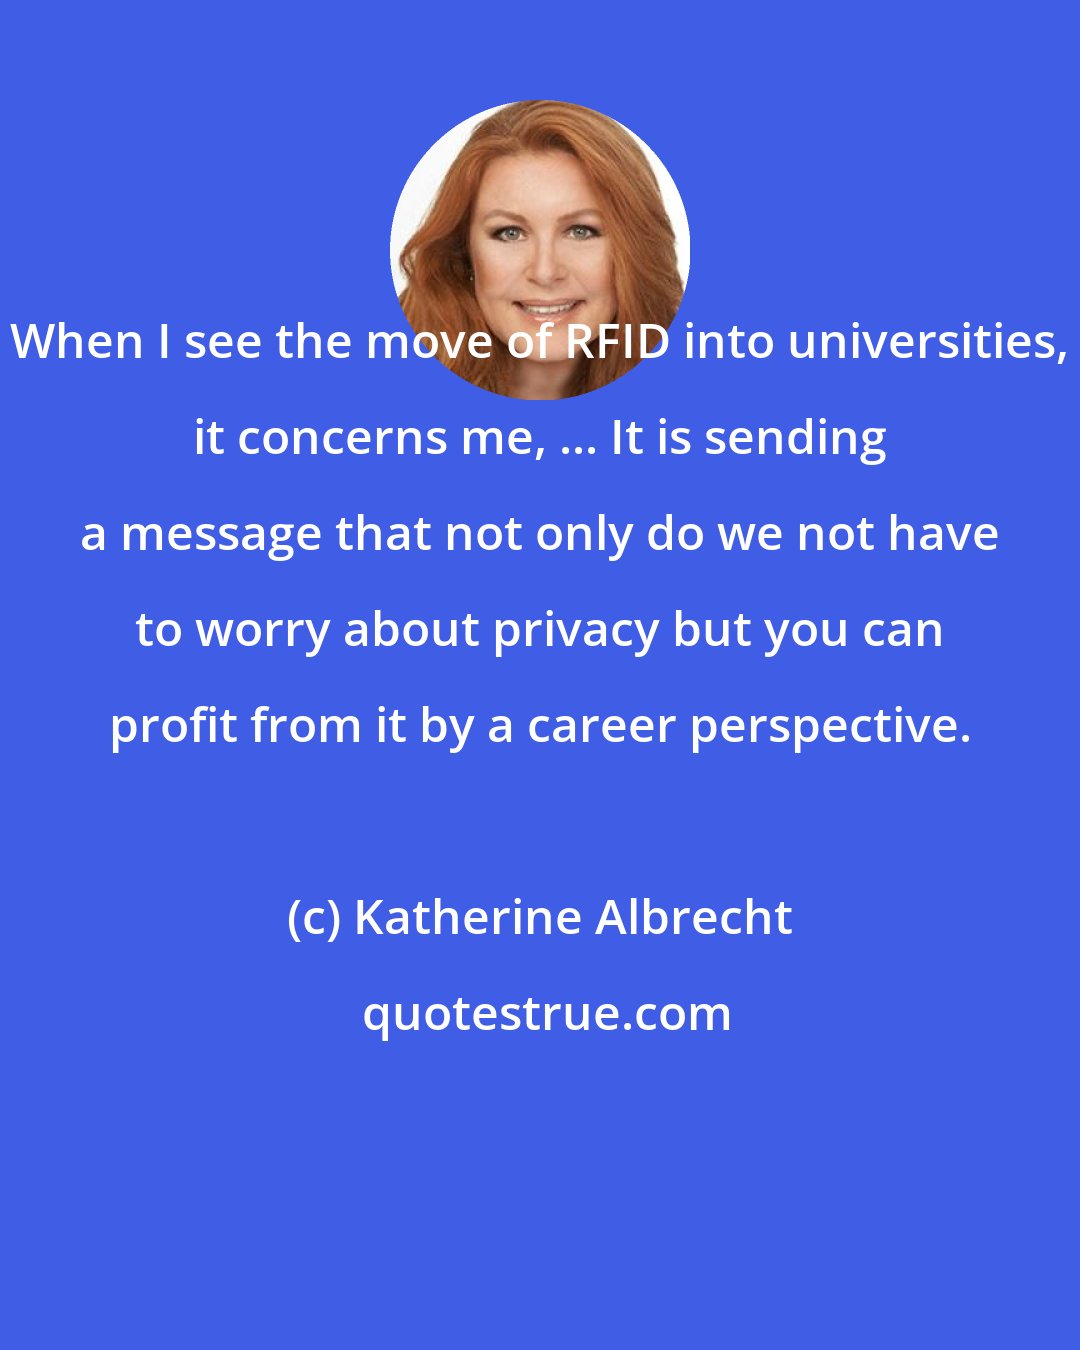 Katherine Albrecht: When I see the move of RFID into universities, it concerns me, ... It is sending a message that not only do we not have to worry about privacy but you can profit from it by a career perspective.